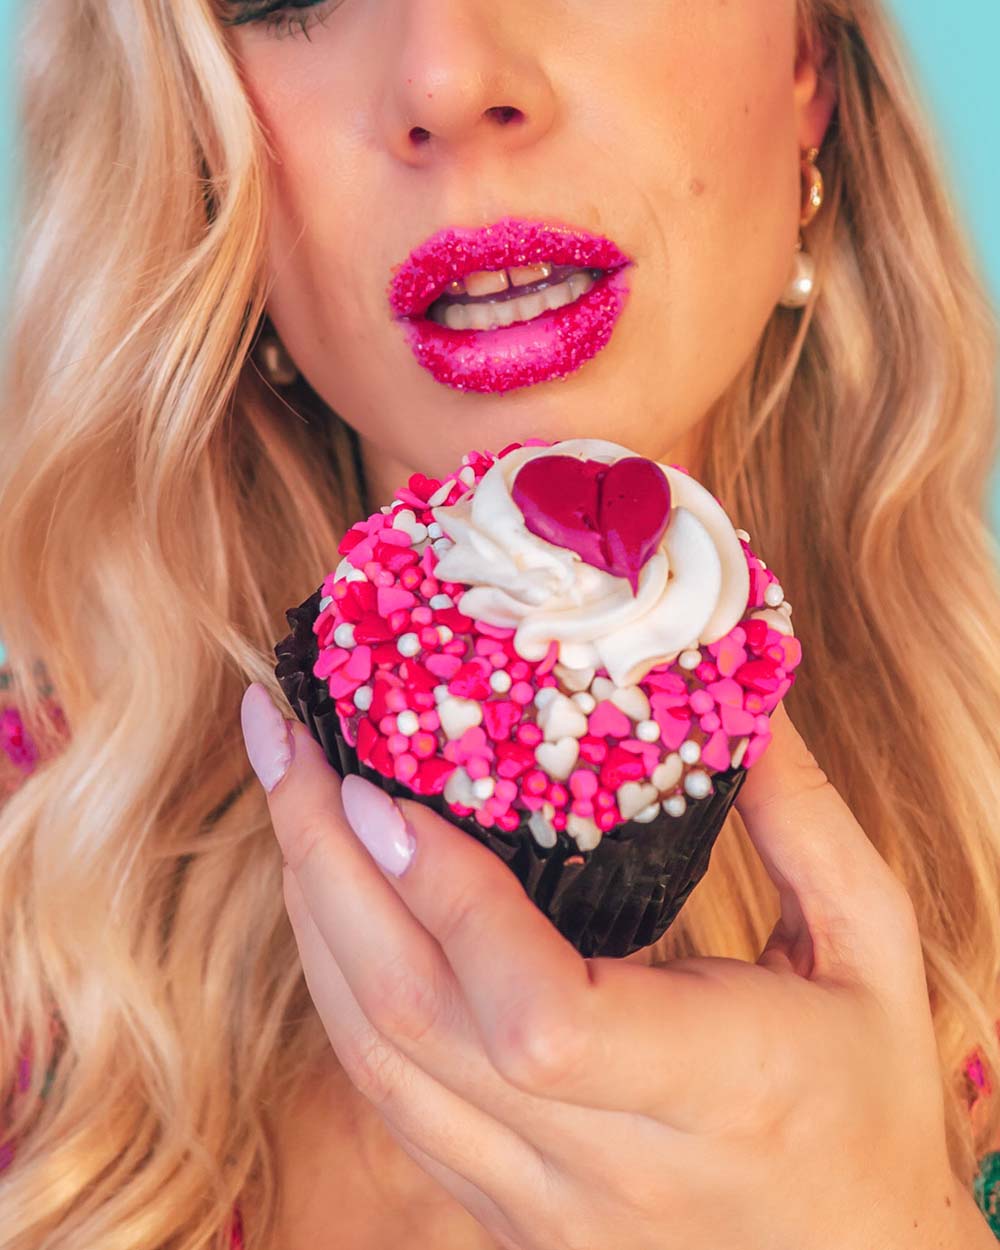 Looking for some fun & creative solo Valentine's Day photoshoot ideas to celebrate you and add a little pink and red to your instagram? This is for you! I've compiled a guide of easy Valentine's day photo ideas you can shoot at home by yourself. All of these ideas involve affordable props and are great for all photography levels. Pictured here: Cover your lips with sprinkles and shoot up close with a cupcake